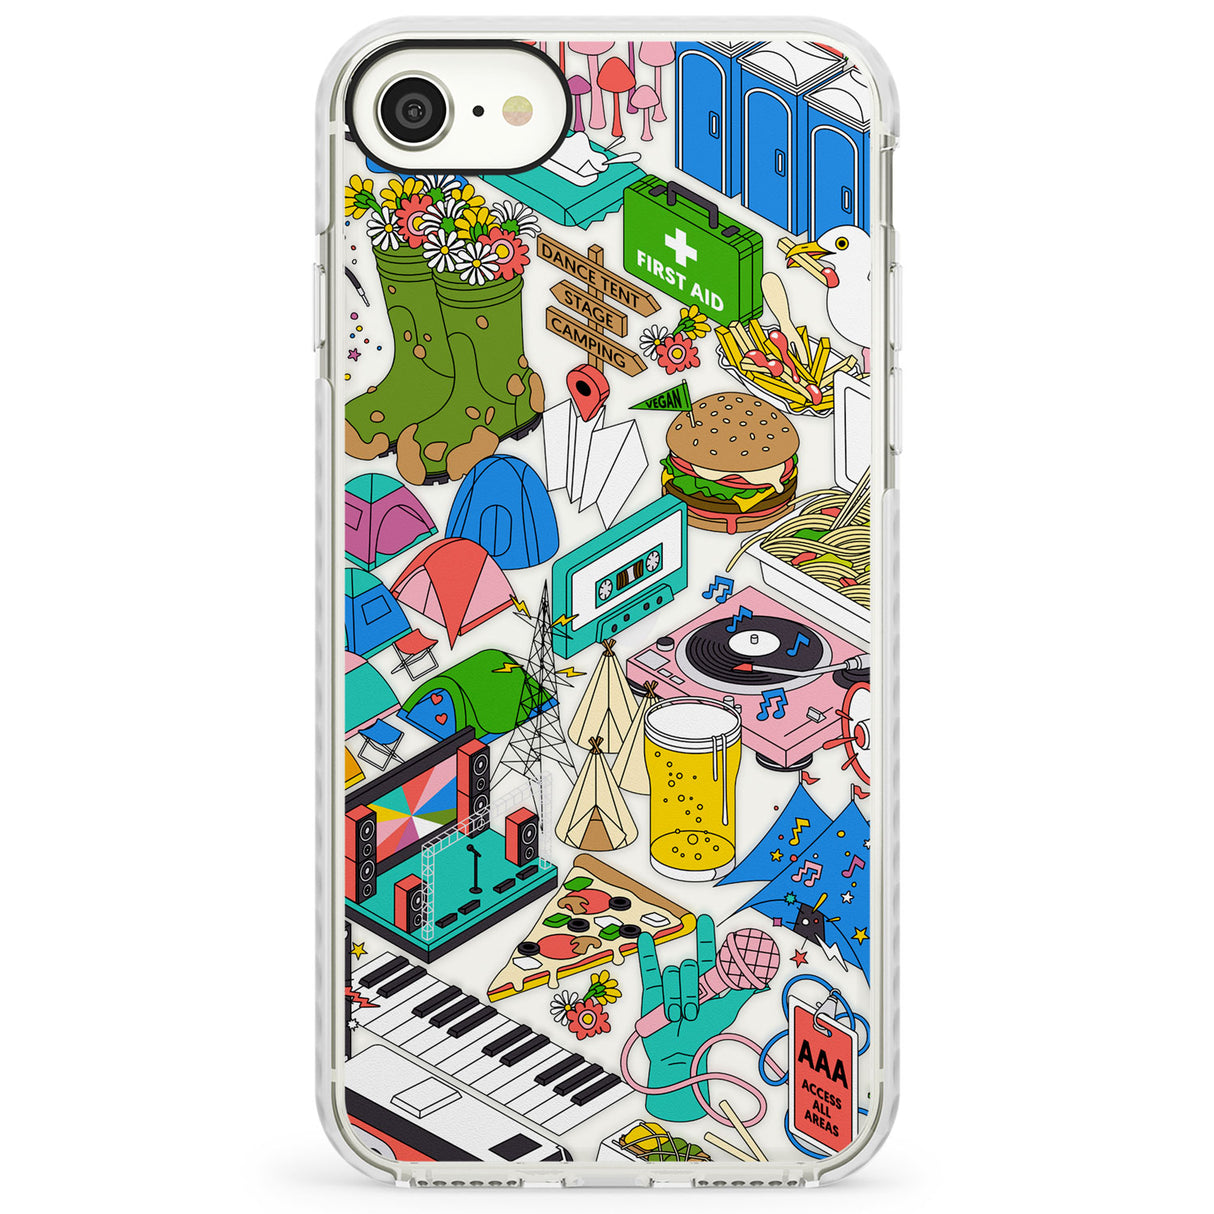 Festival FrenzyImpact Phone Case for iPhone SE